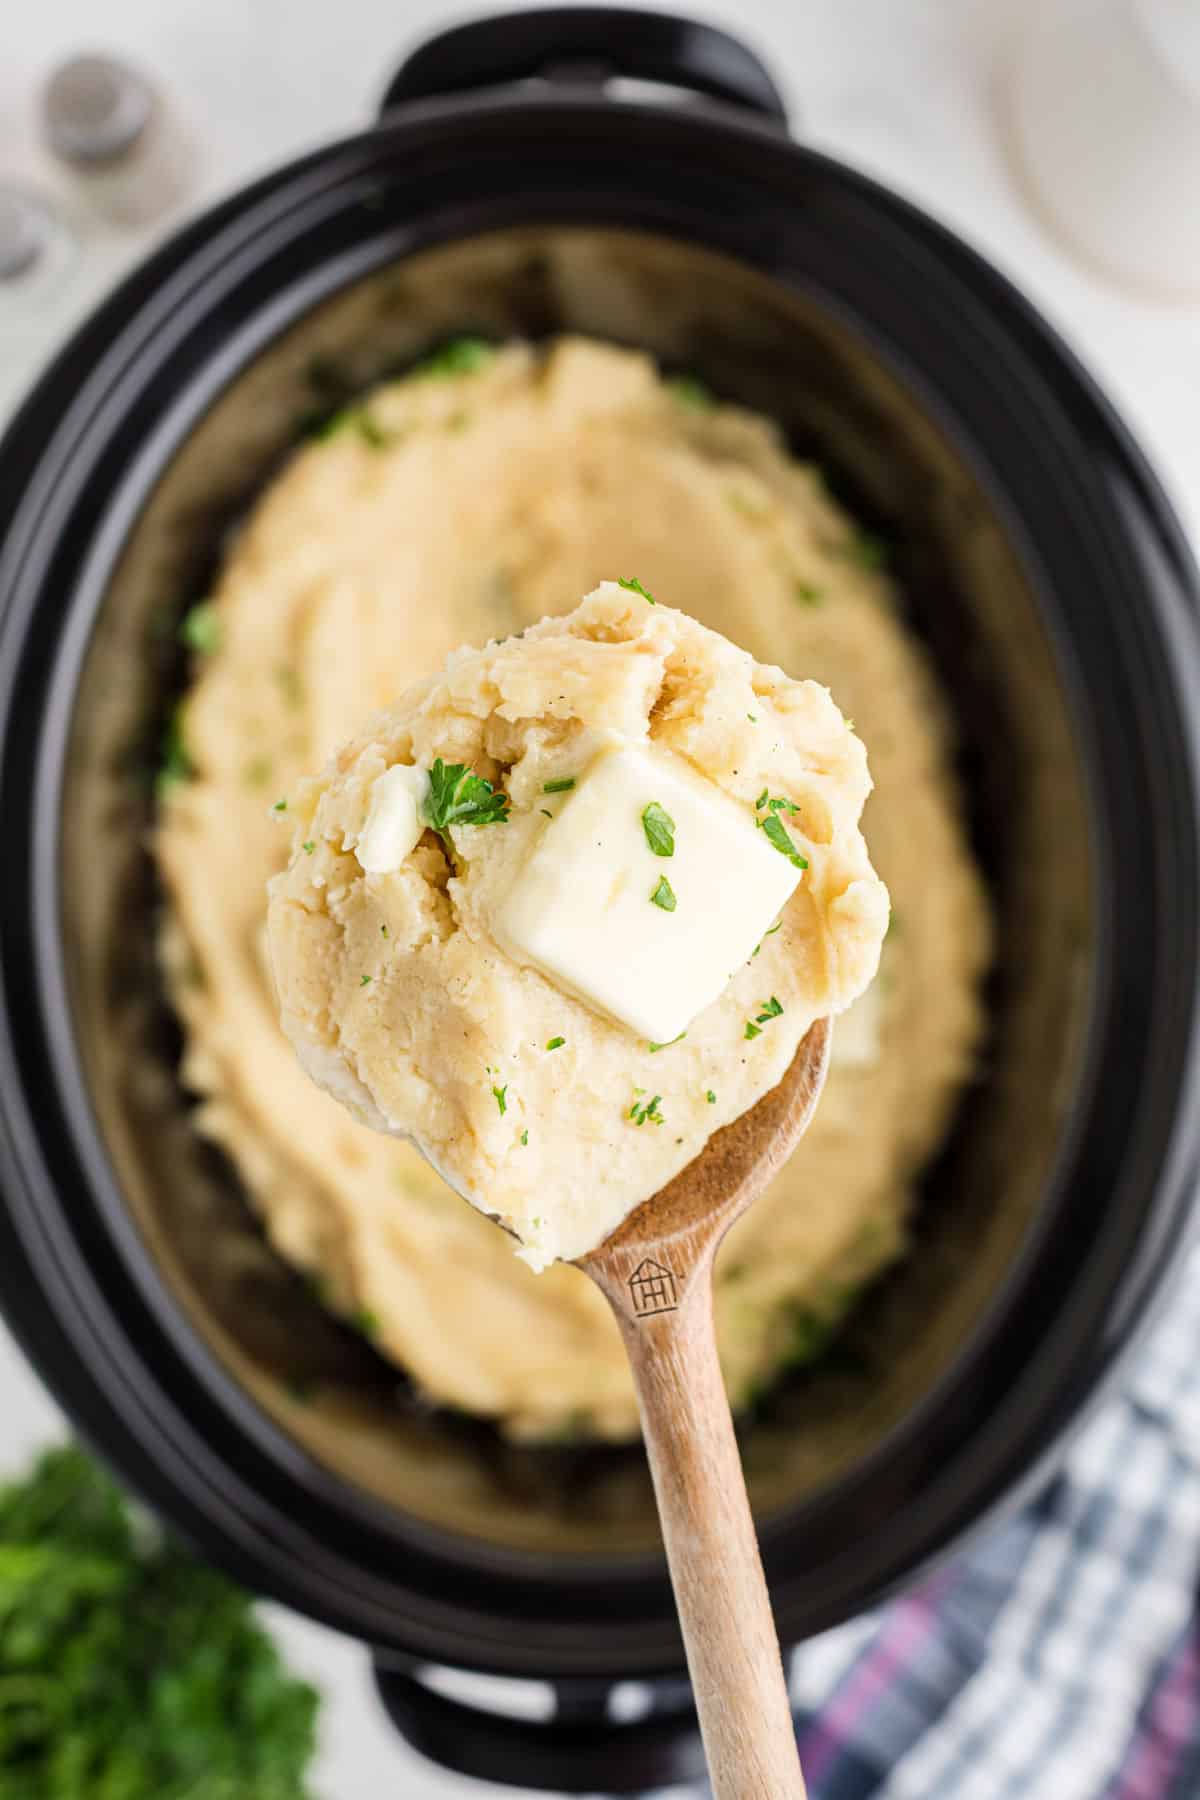 Crock Pot Mashed Potatoes, a spoon scooping some out.